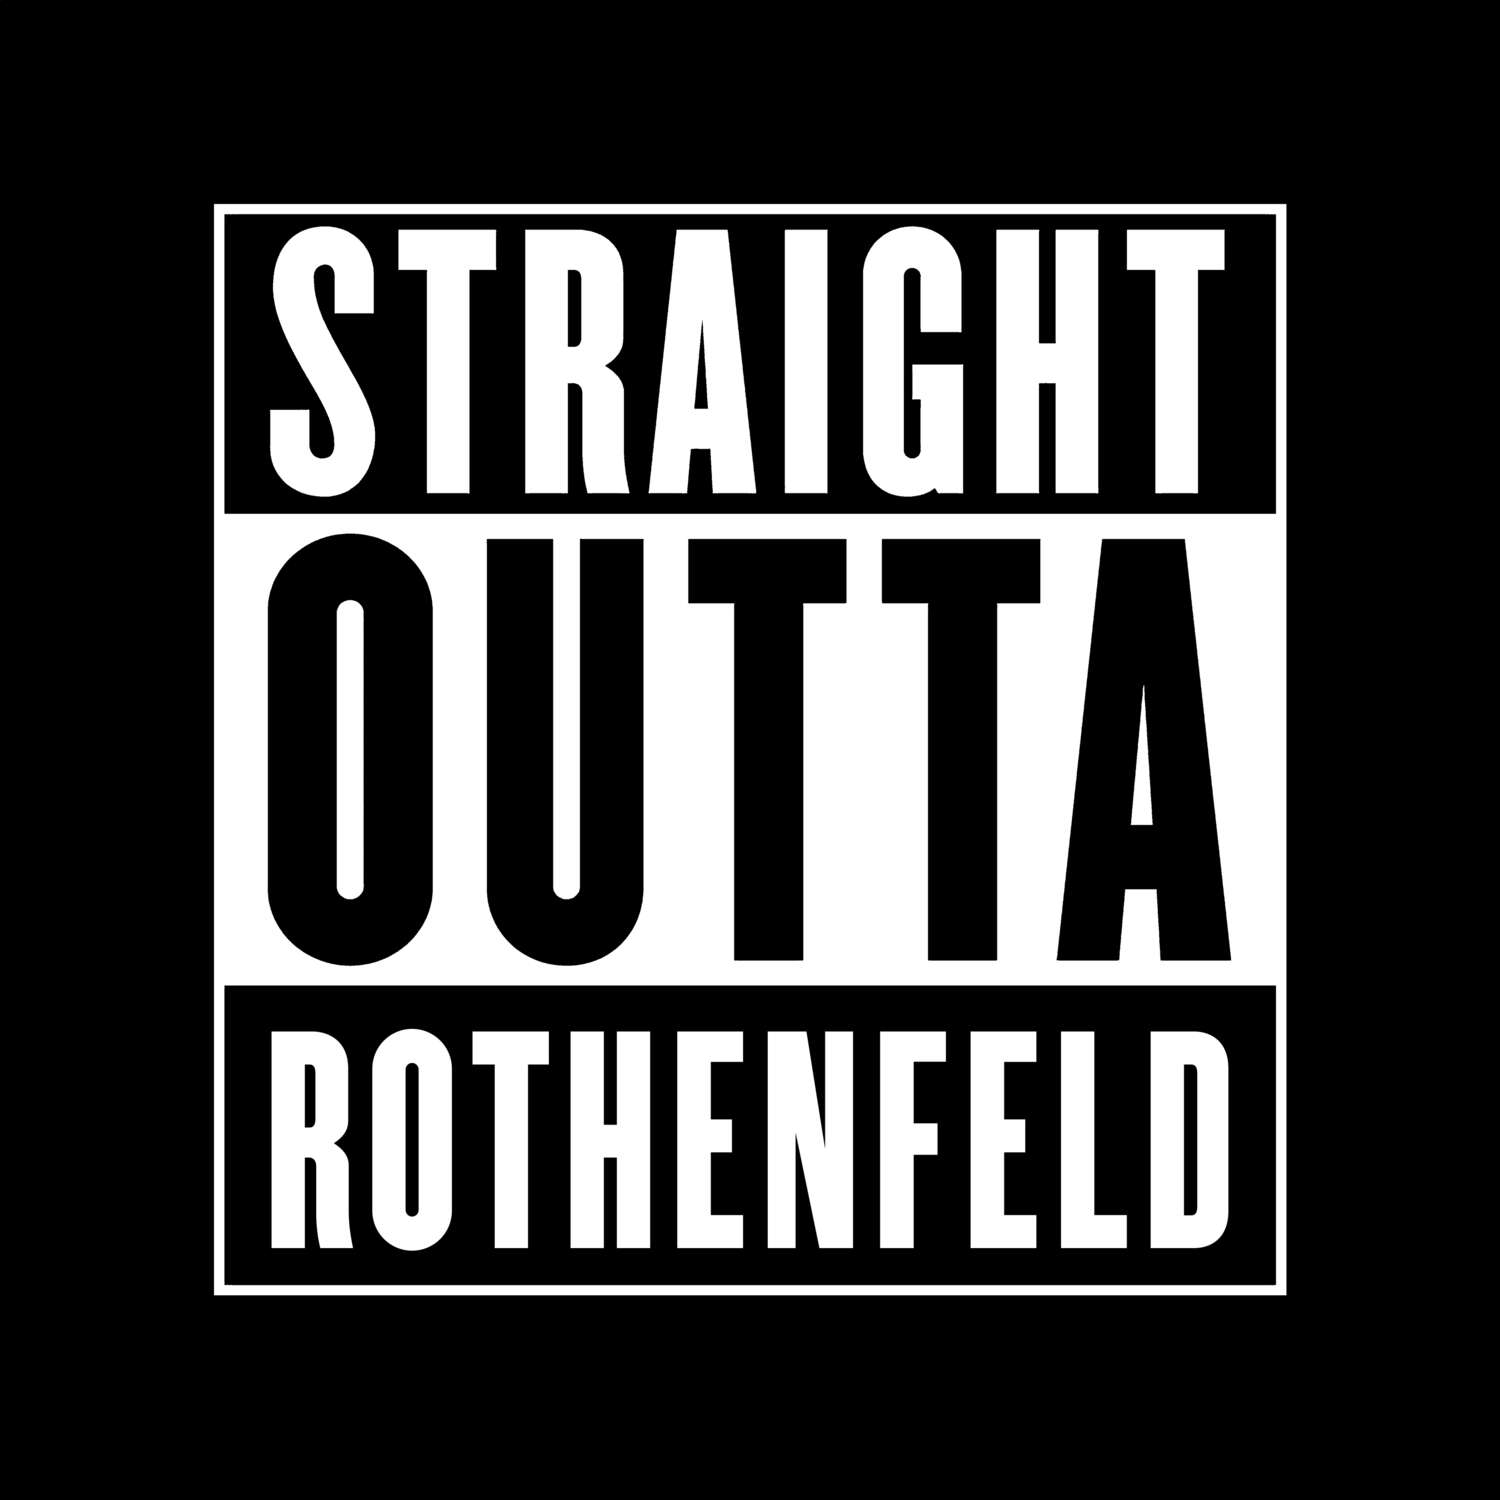 Rothenfeld T-Shirt »Straight Outta«